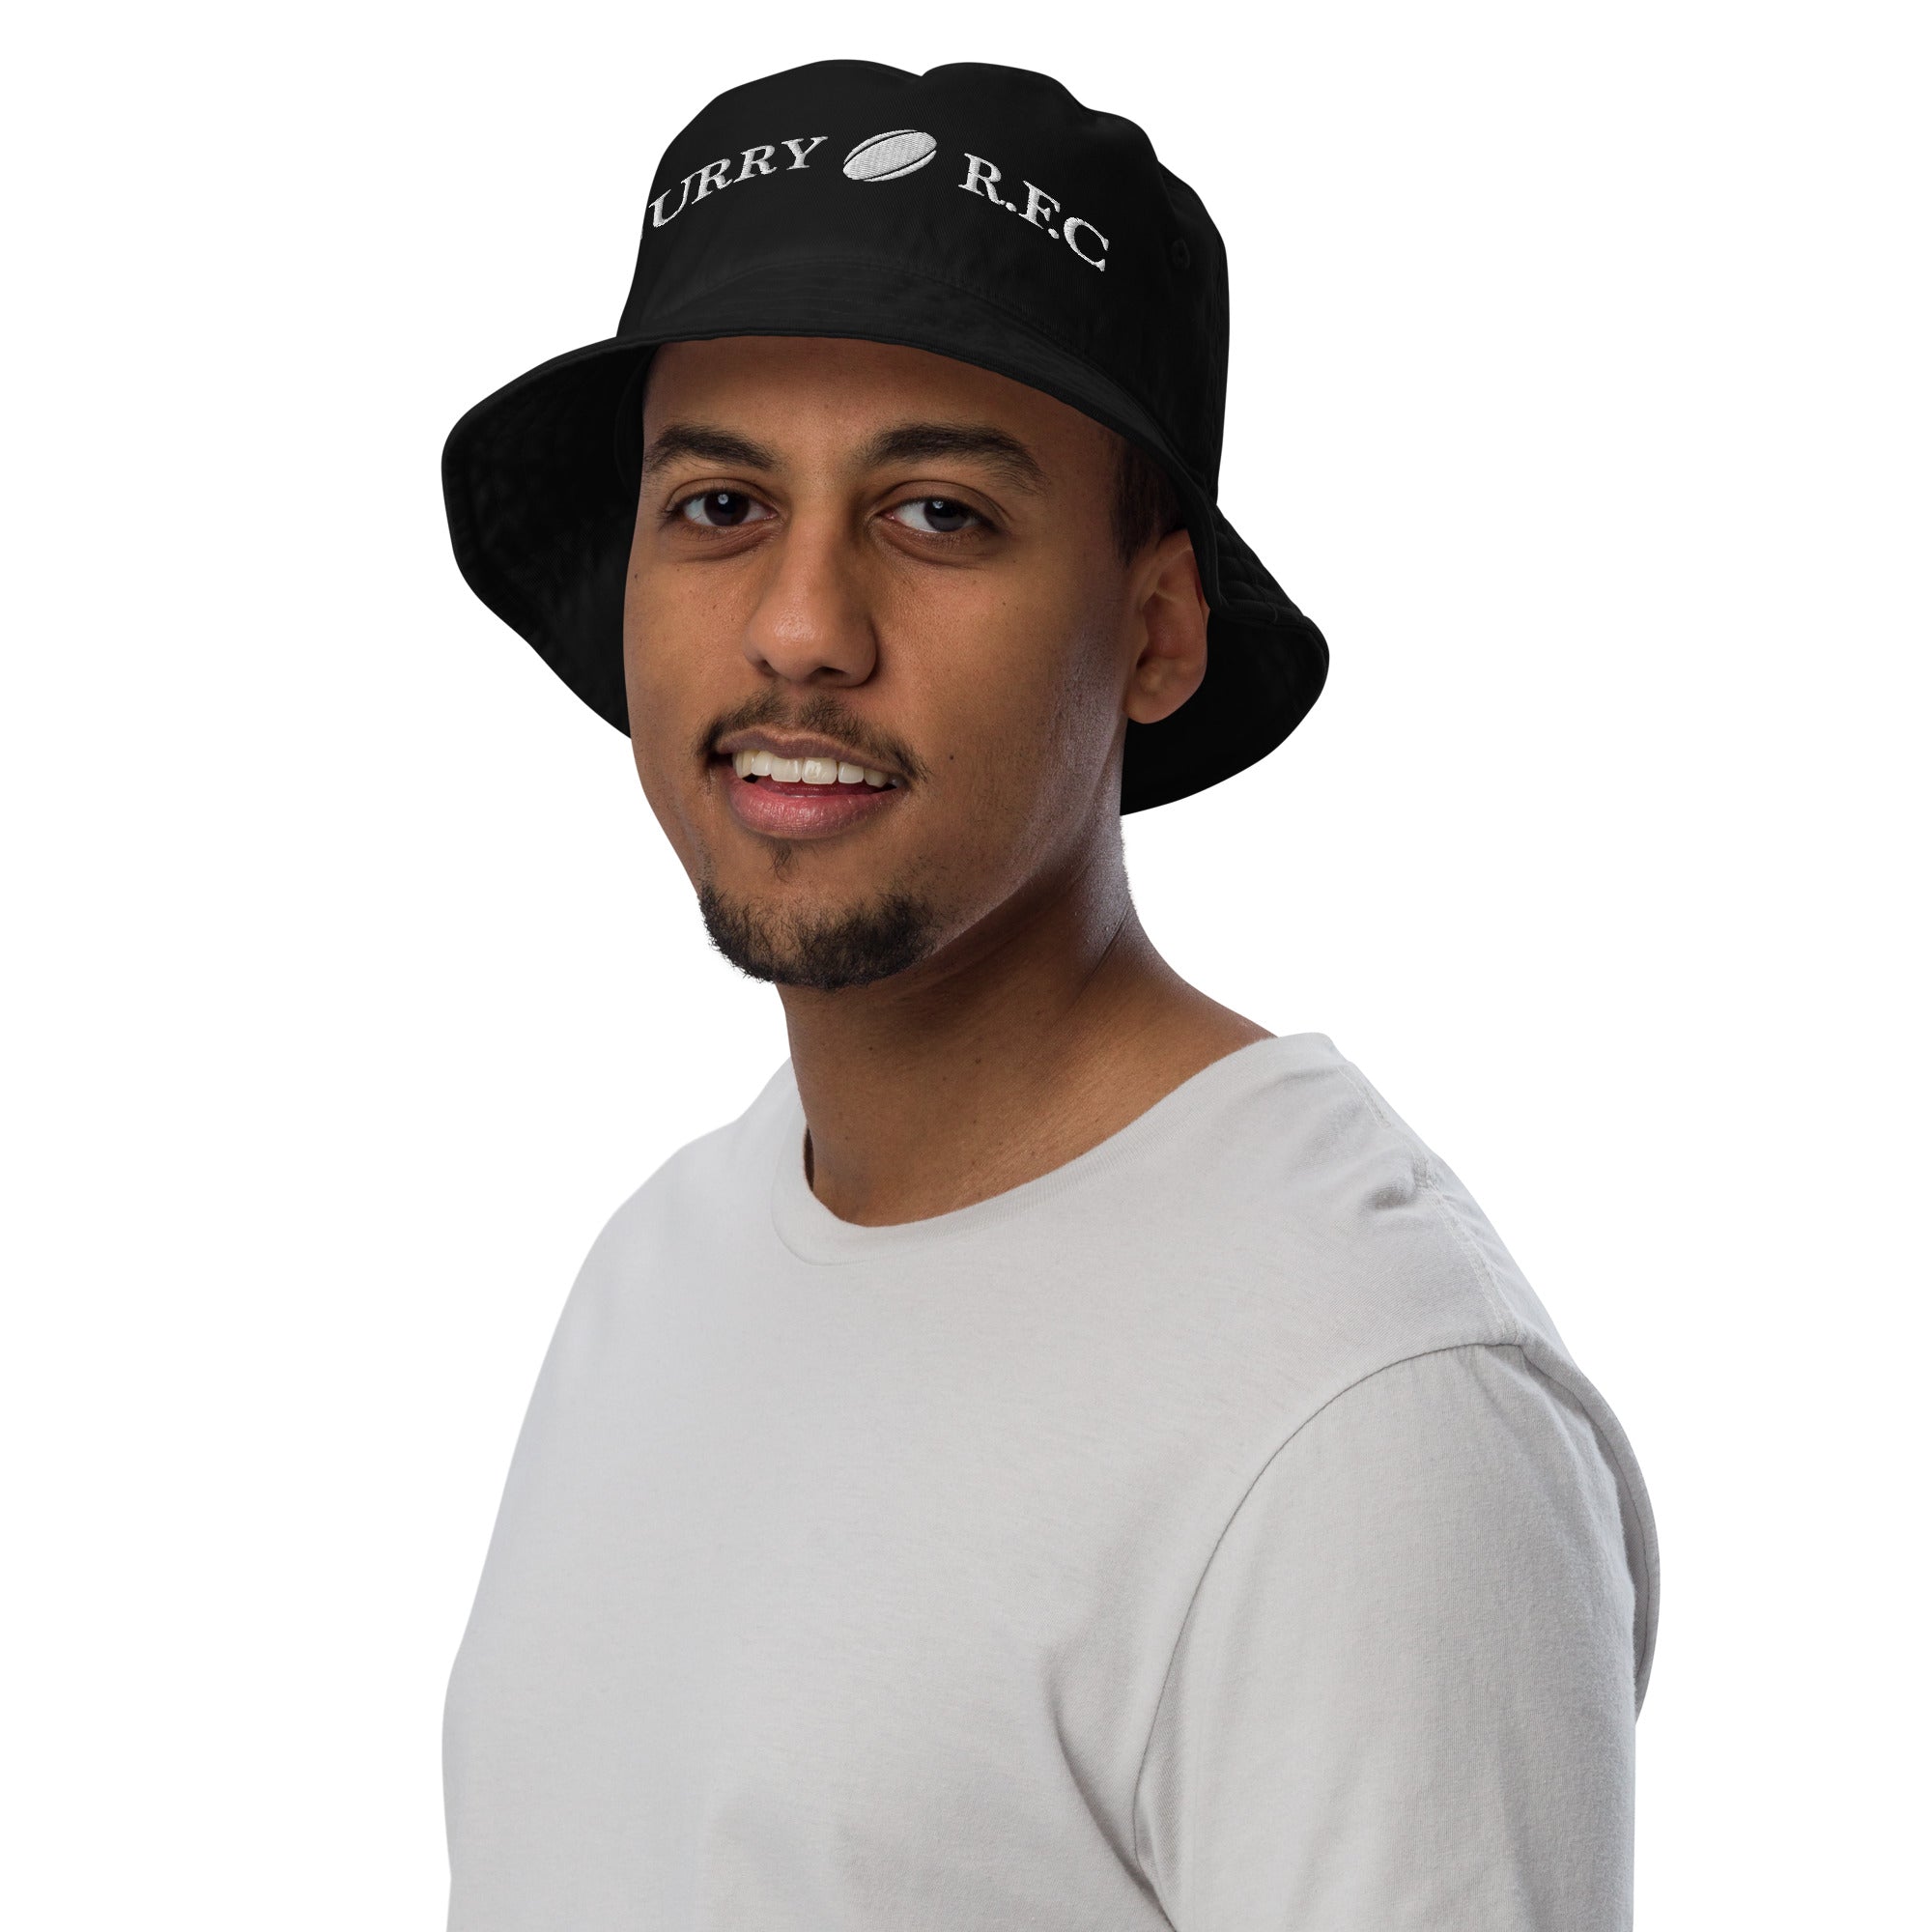 Rugby Imports Organic bucket hat